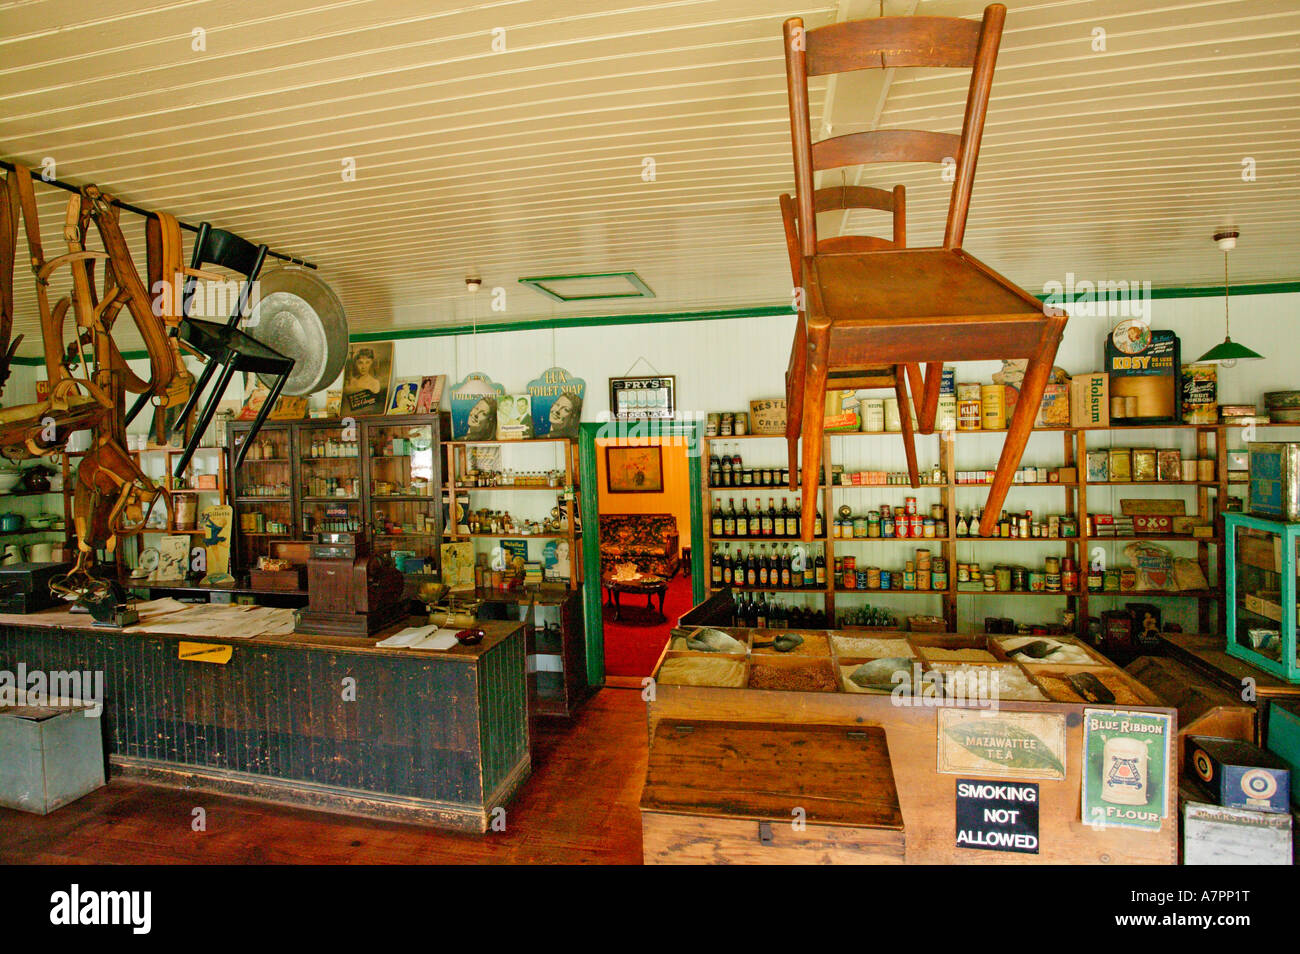 The interior of the Dredzen general dealer store in Pilgrims Rest with goods displayed on the shelves and chairs hanging Stock Photo